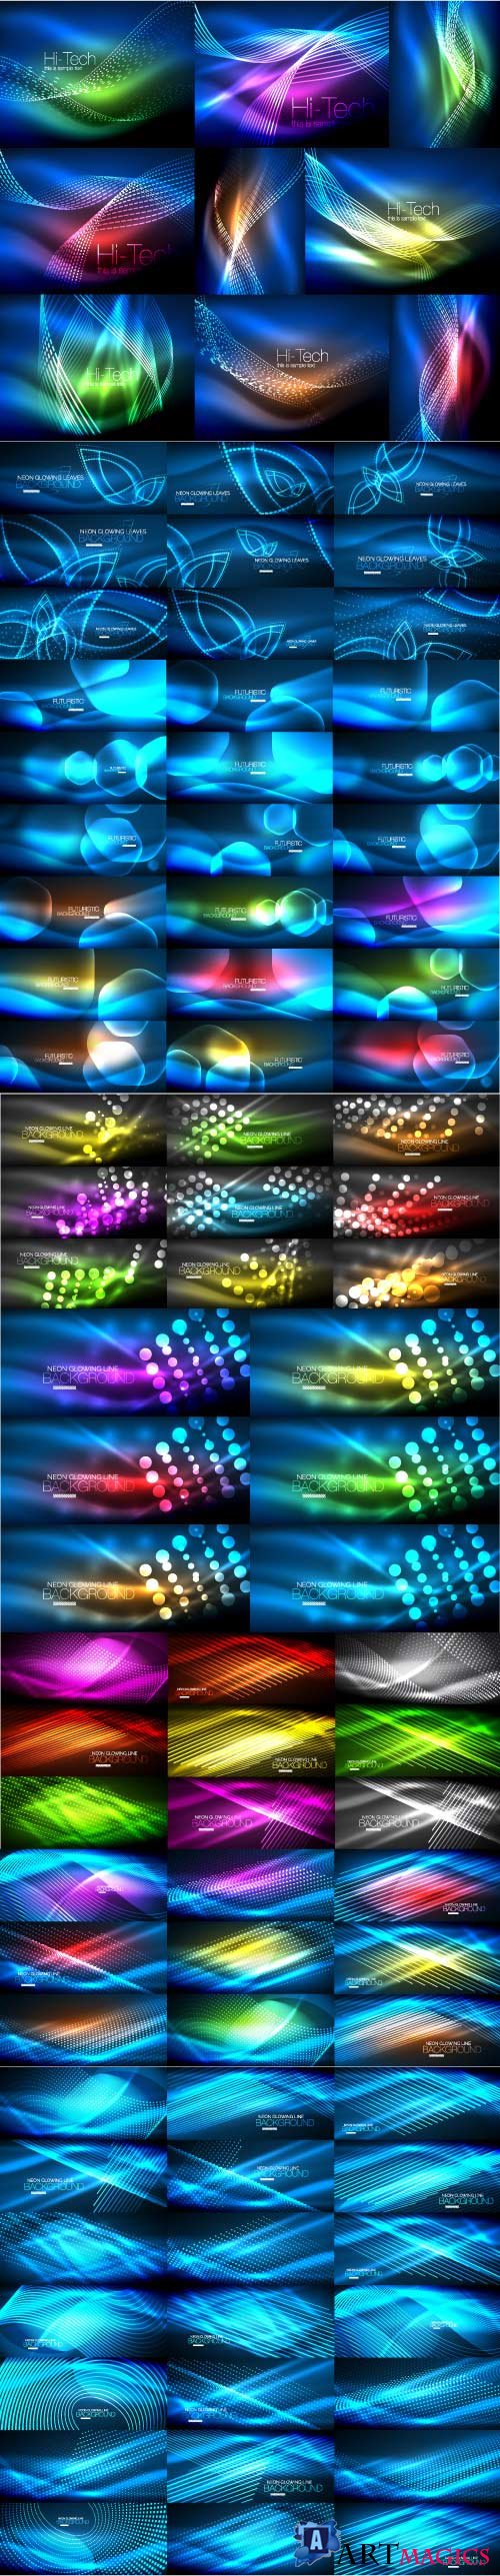 Mega collection of neon glowing waves # 4